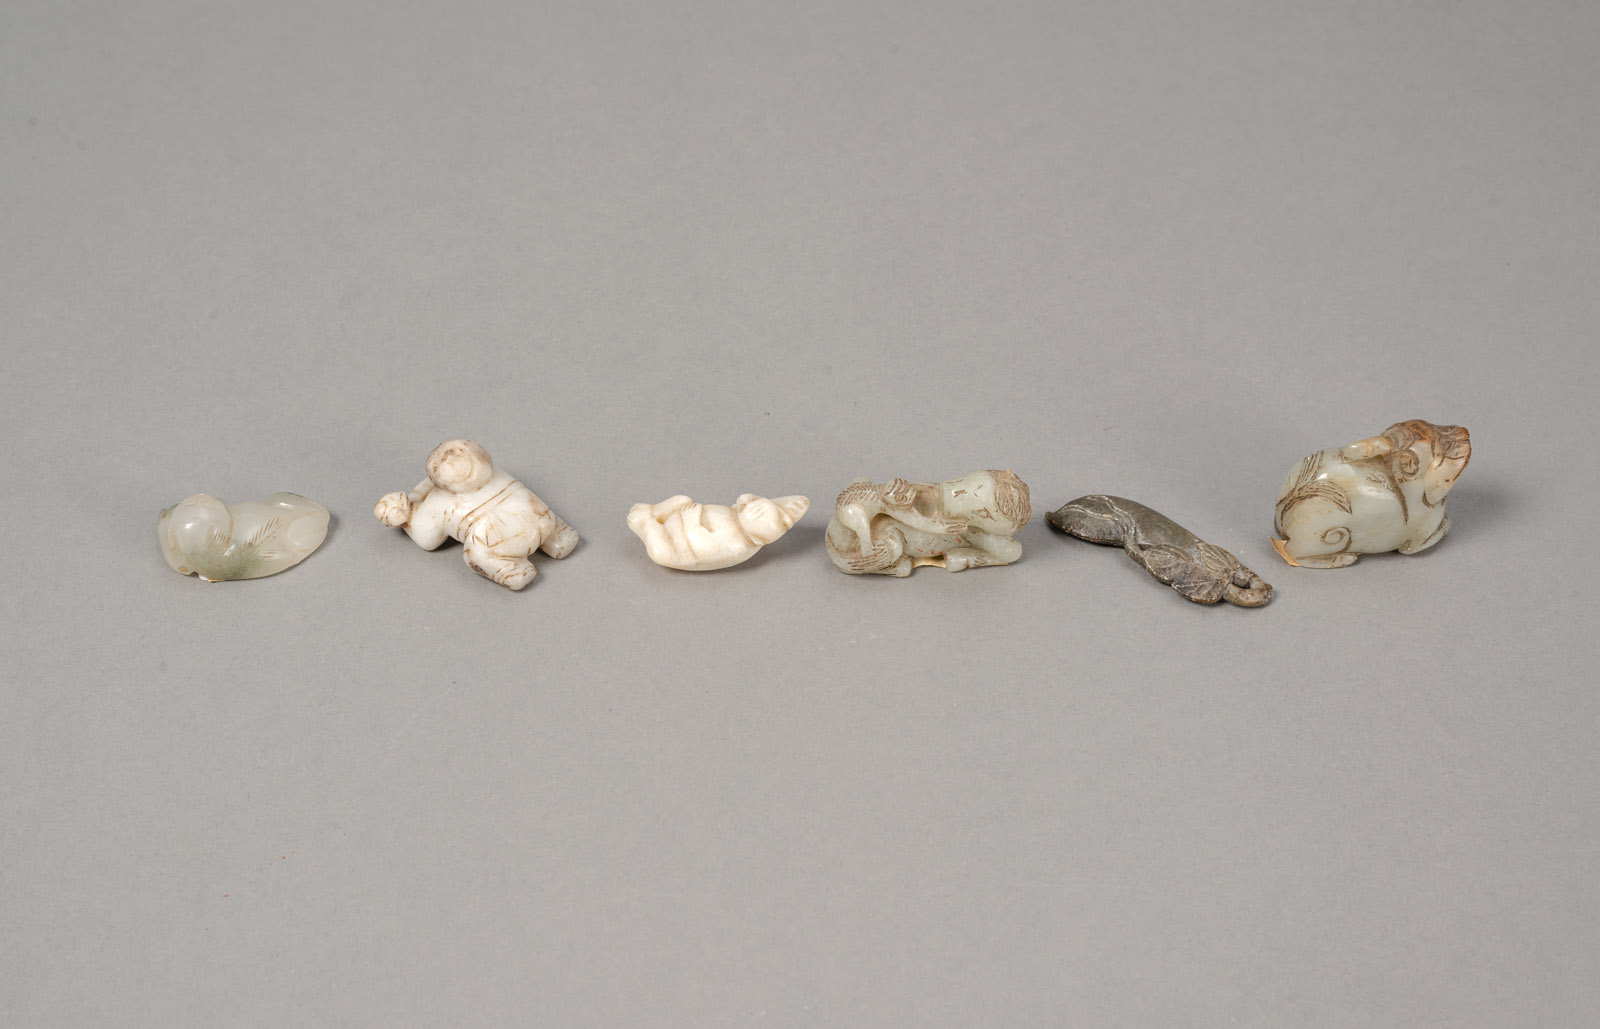 SIX SMALL JADE AND STONE CARVINGS IN THE SHAPE OF HORSE, MONKEY, CATS, BOY AND PEA POD - Image 2 of 3